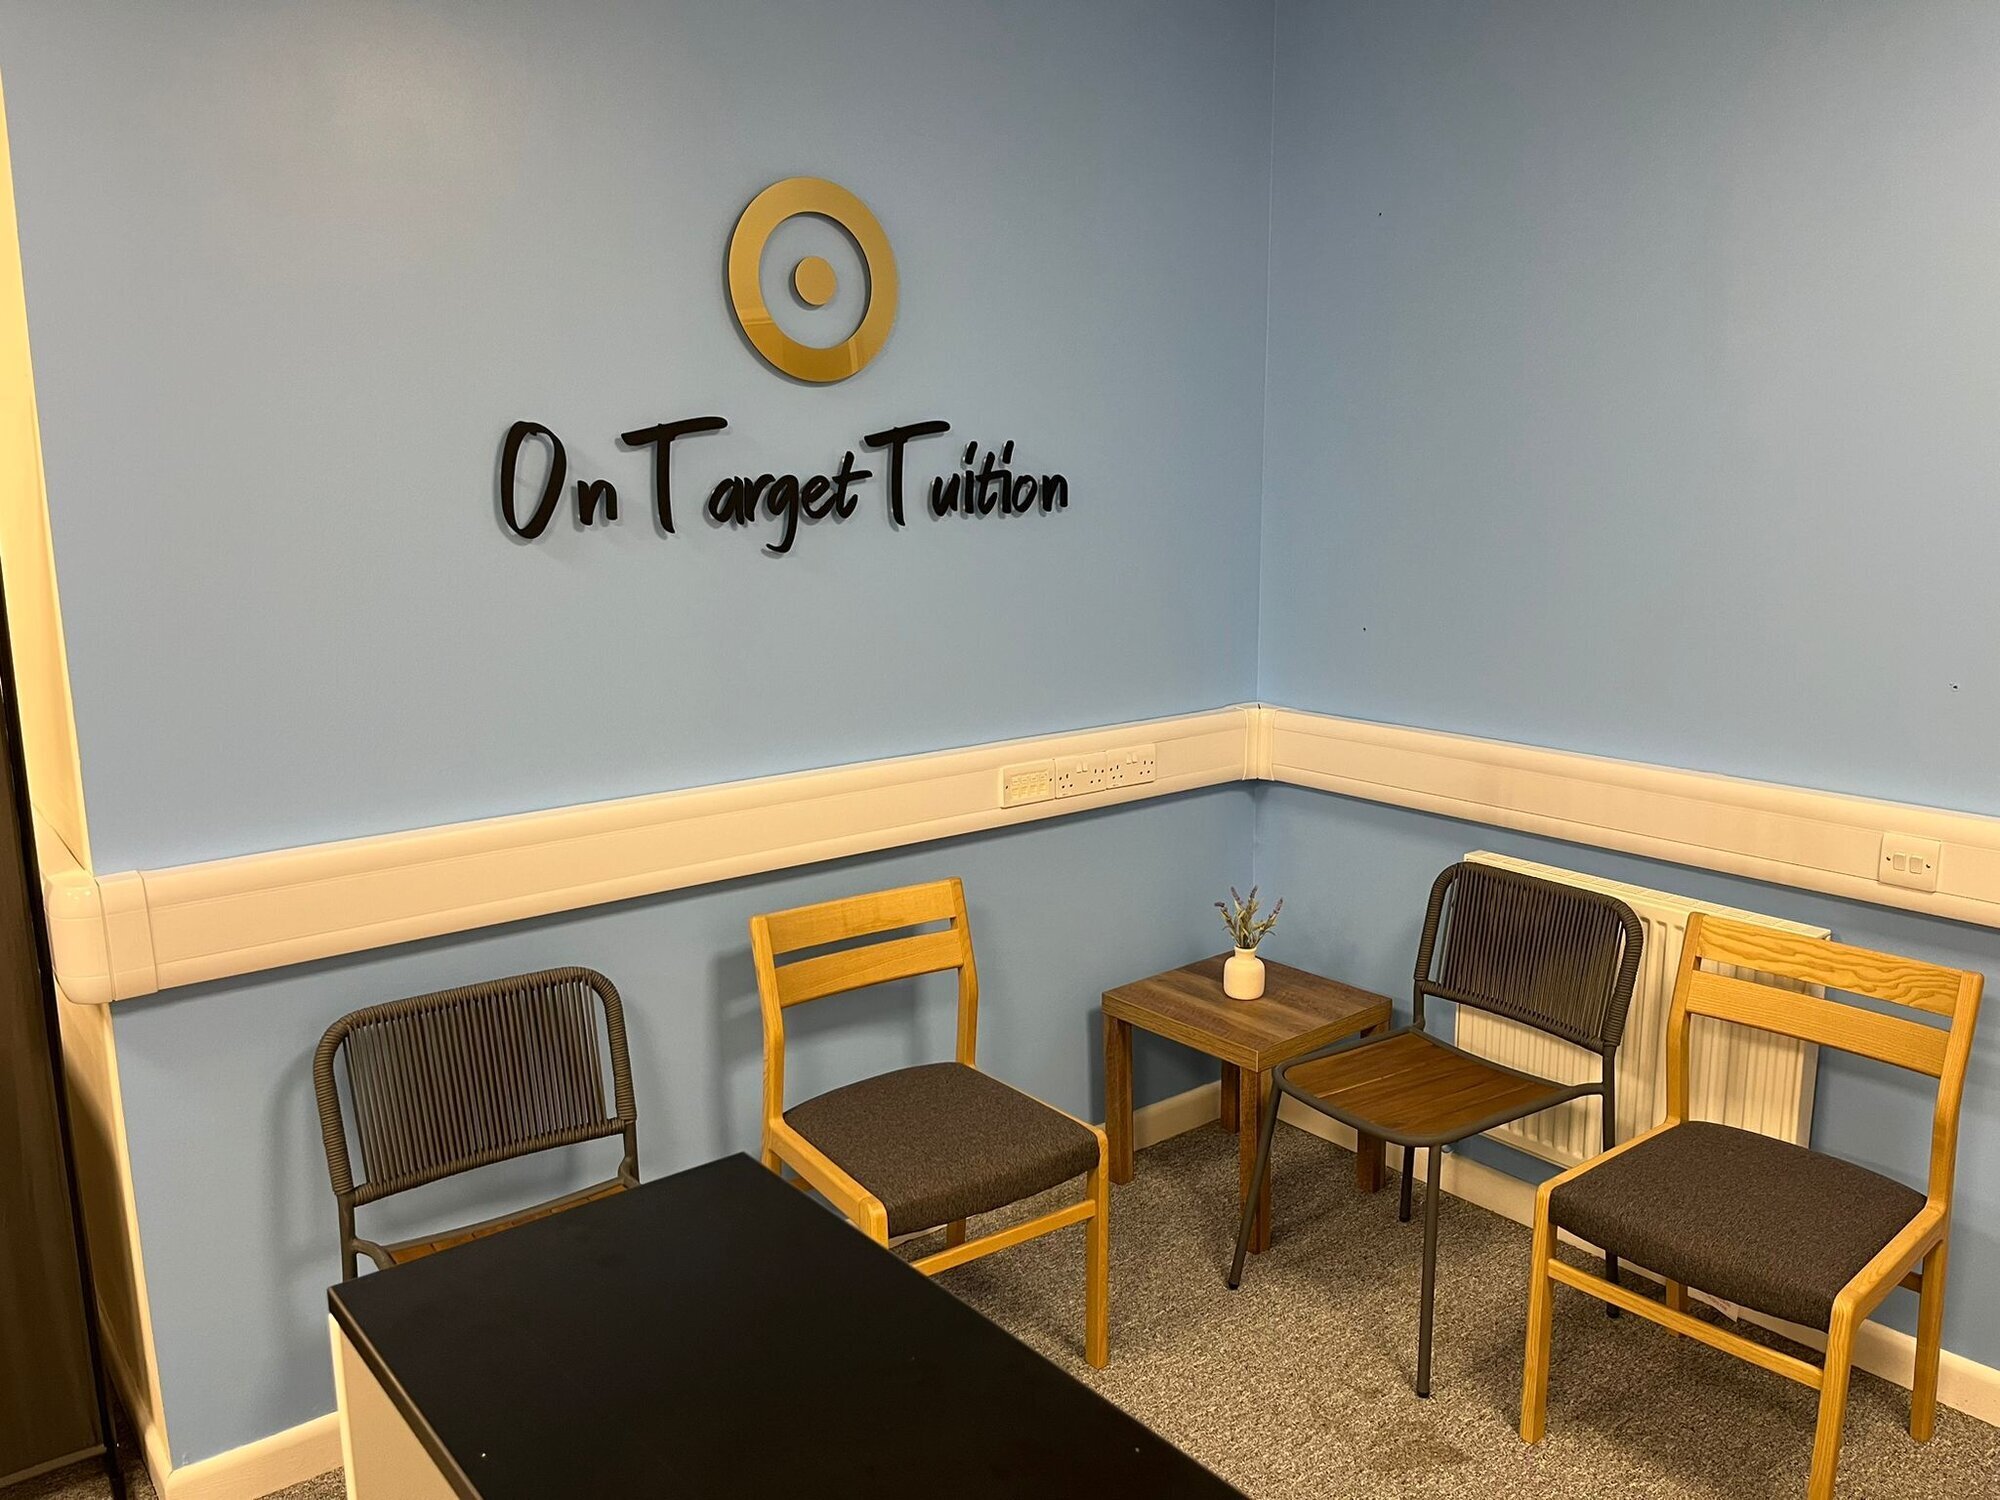 Images On Target Tuition